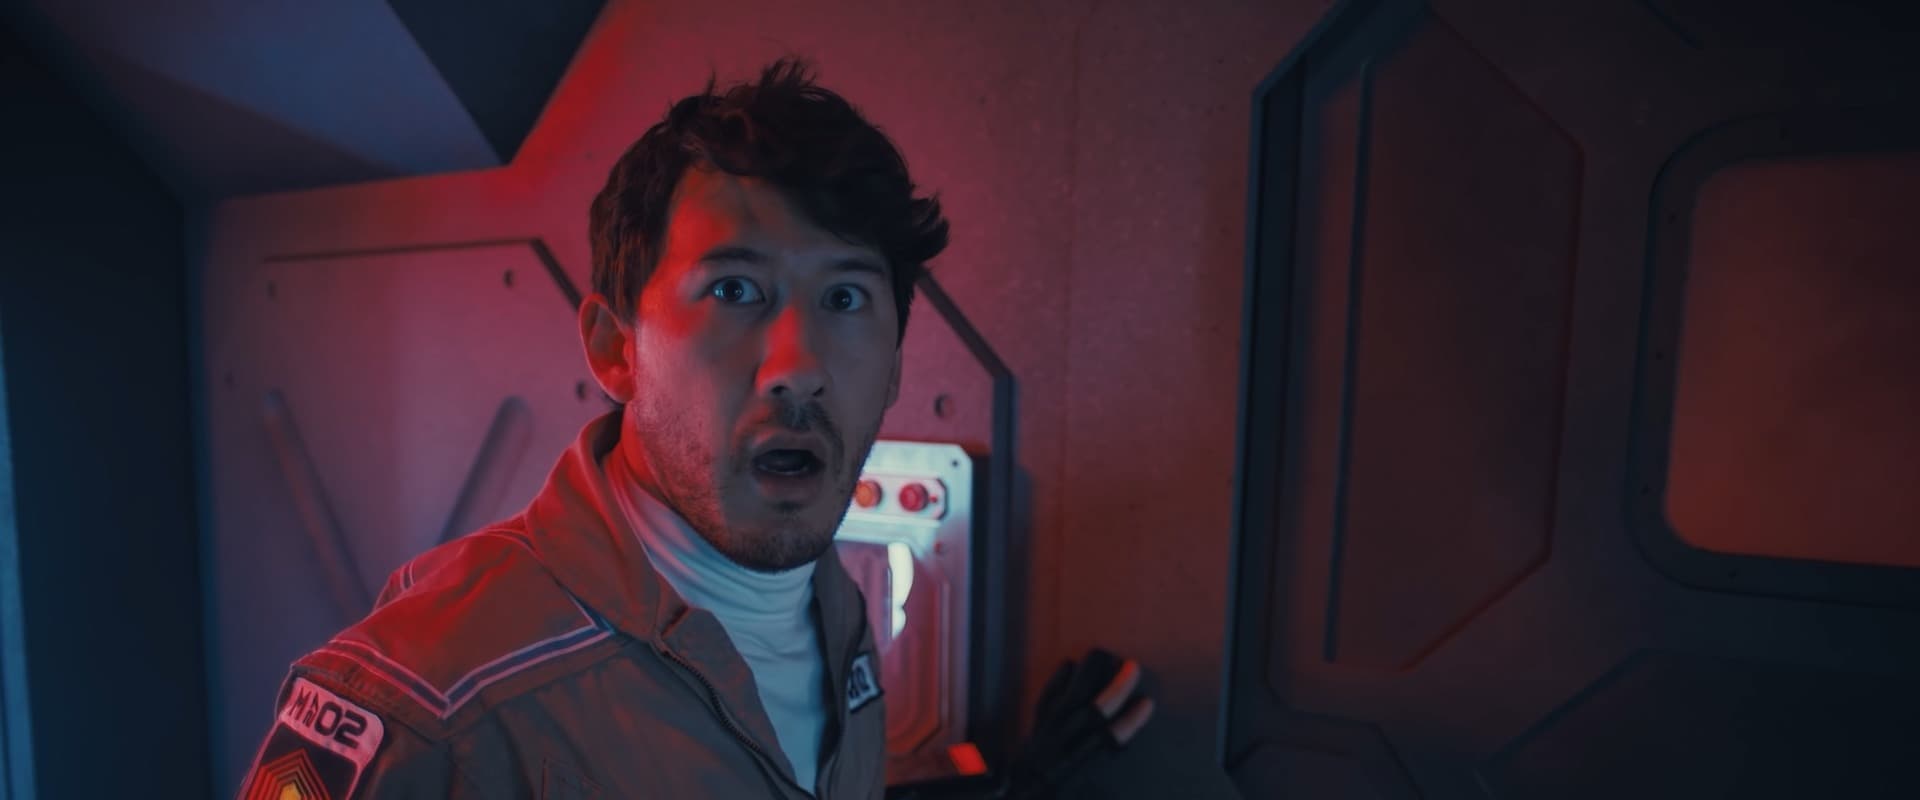 In Space with Markiplier